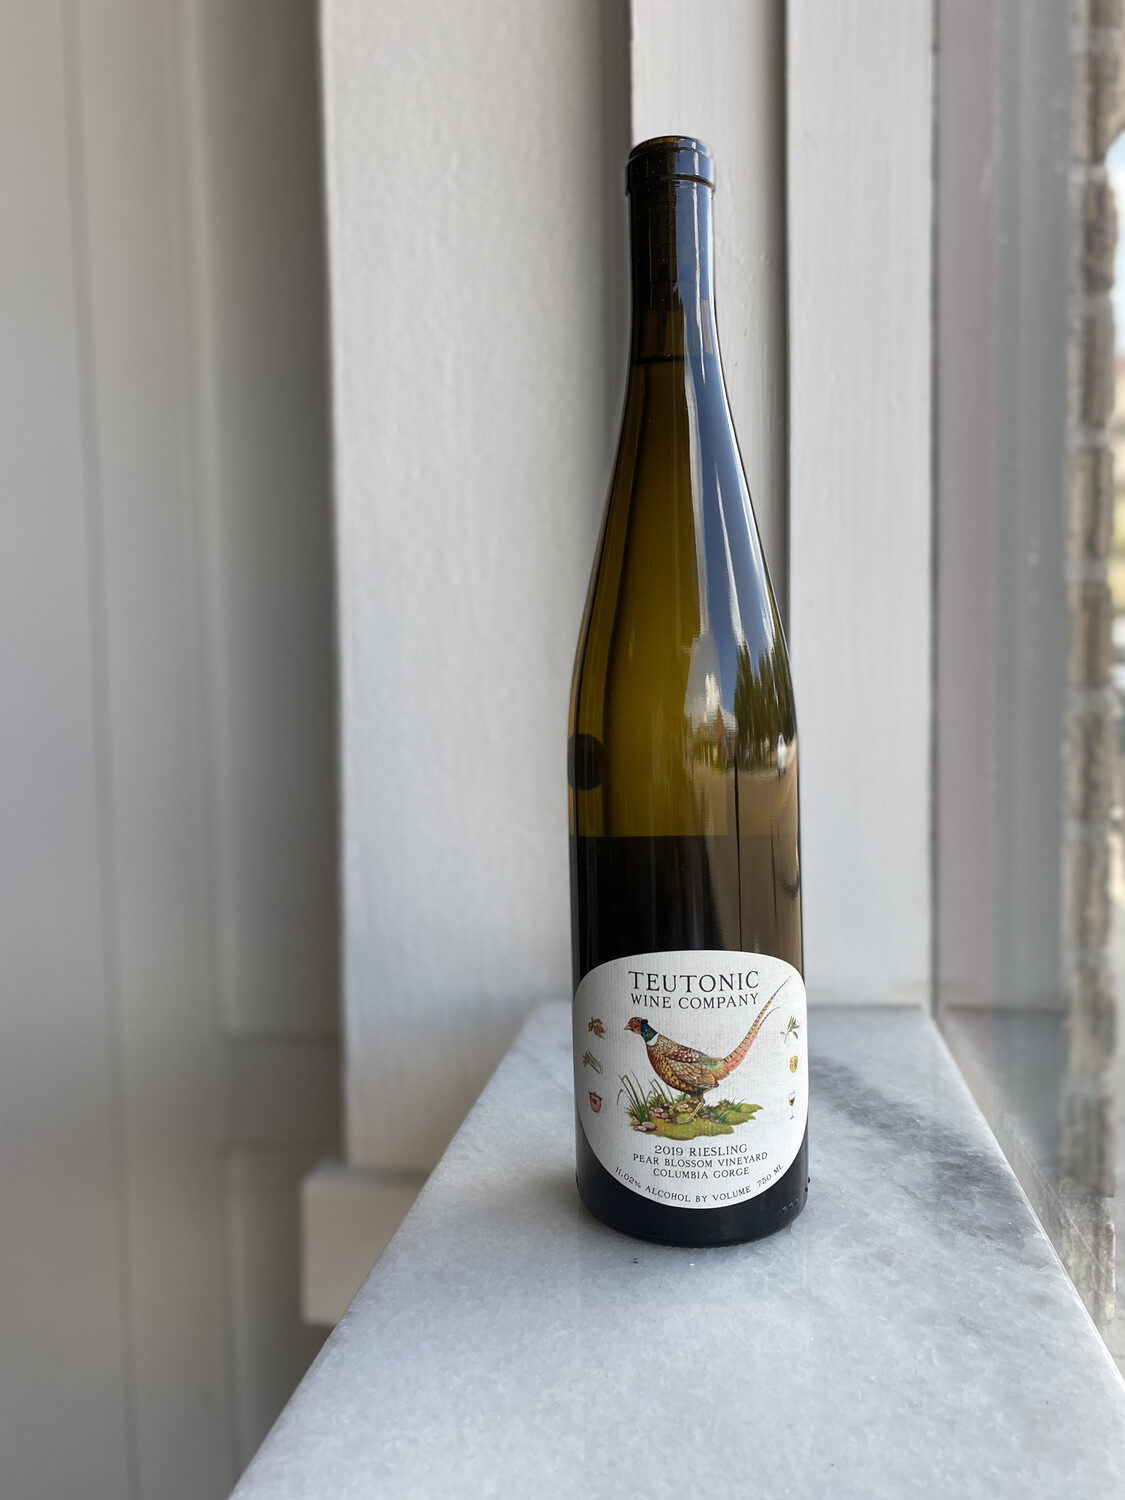 Teutonic, Pear Blossom Riesling (2019)